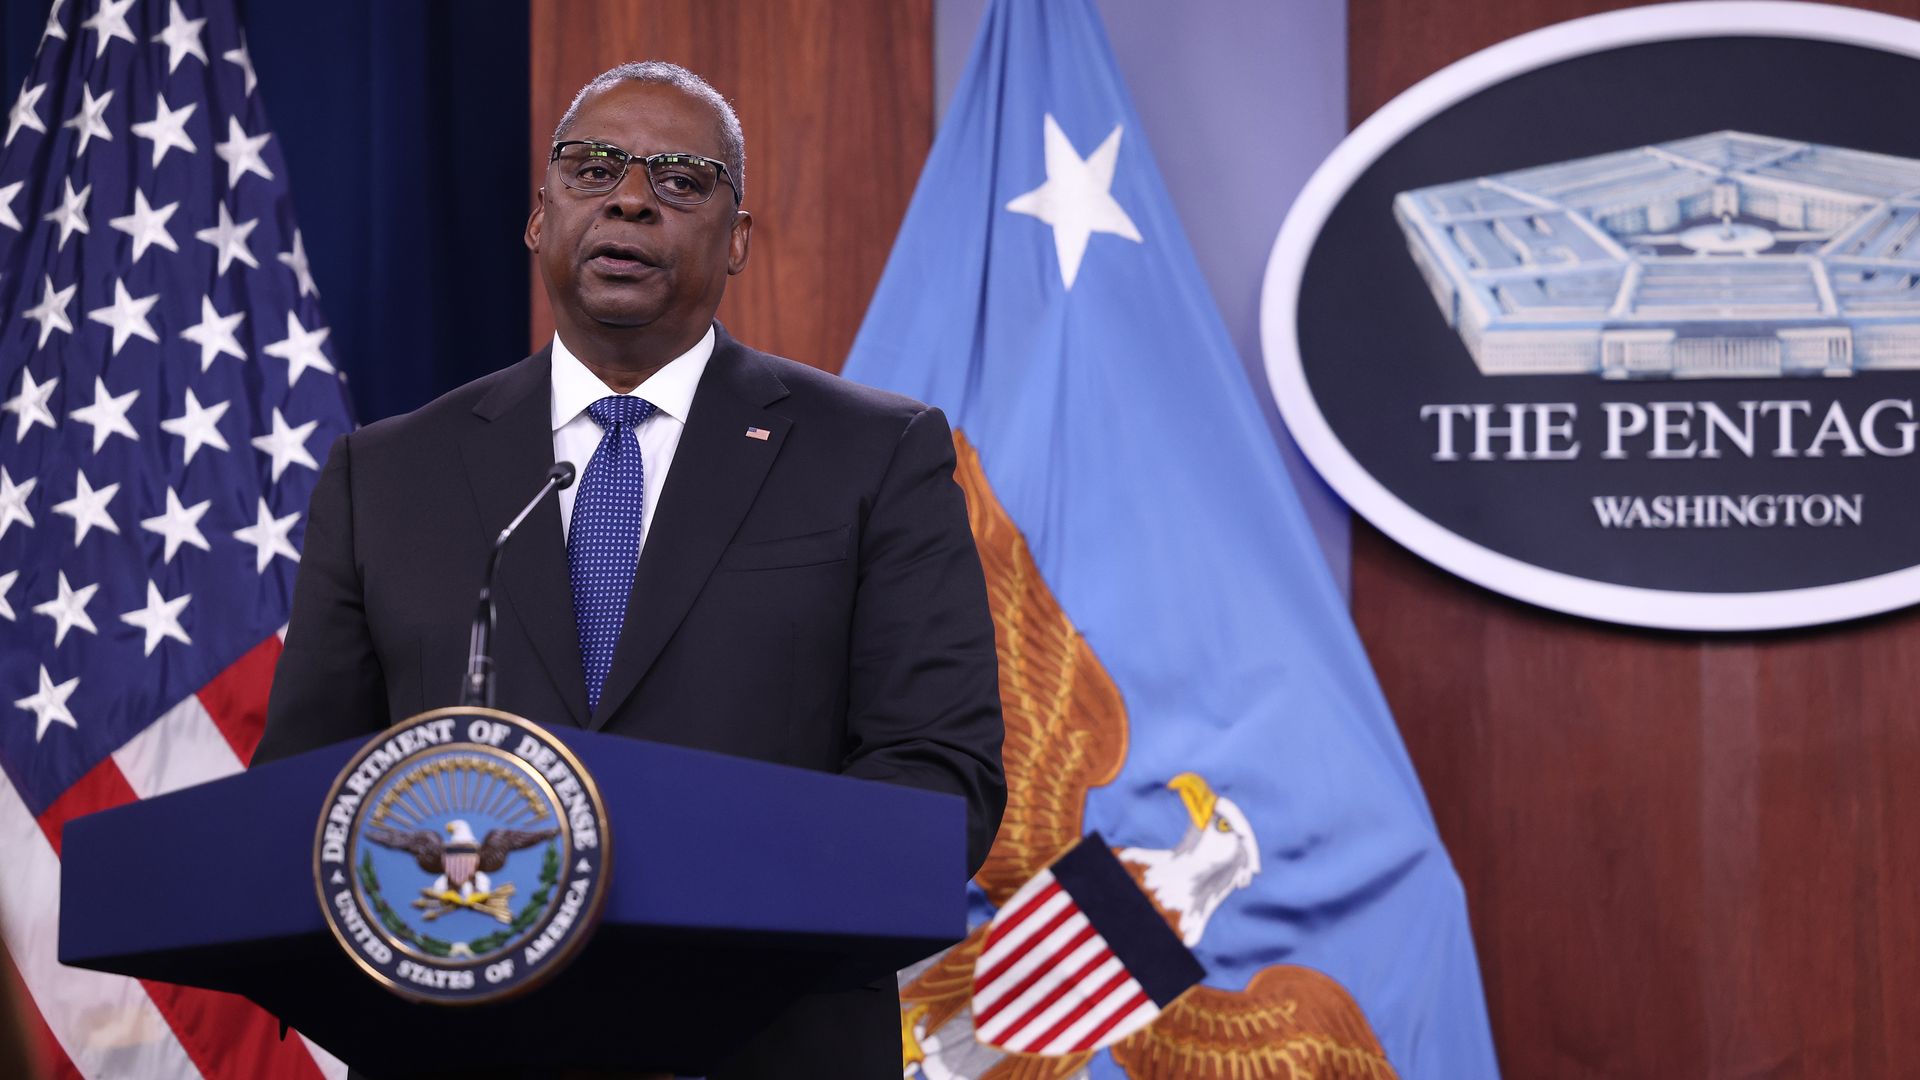 Secretary of Defense Lloyd Austin speaks at a news briefing at the Pentagon on July 20, 2022 